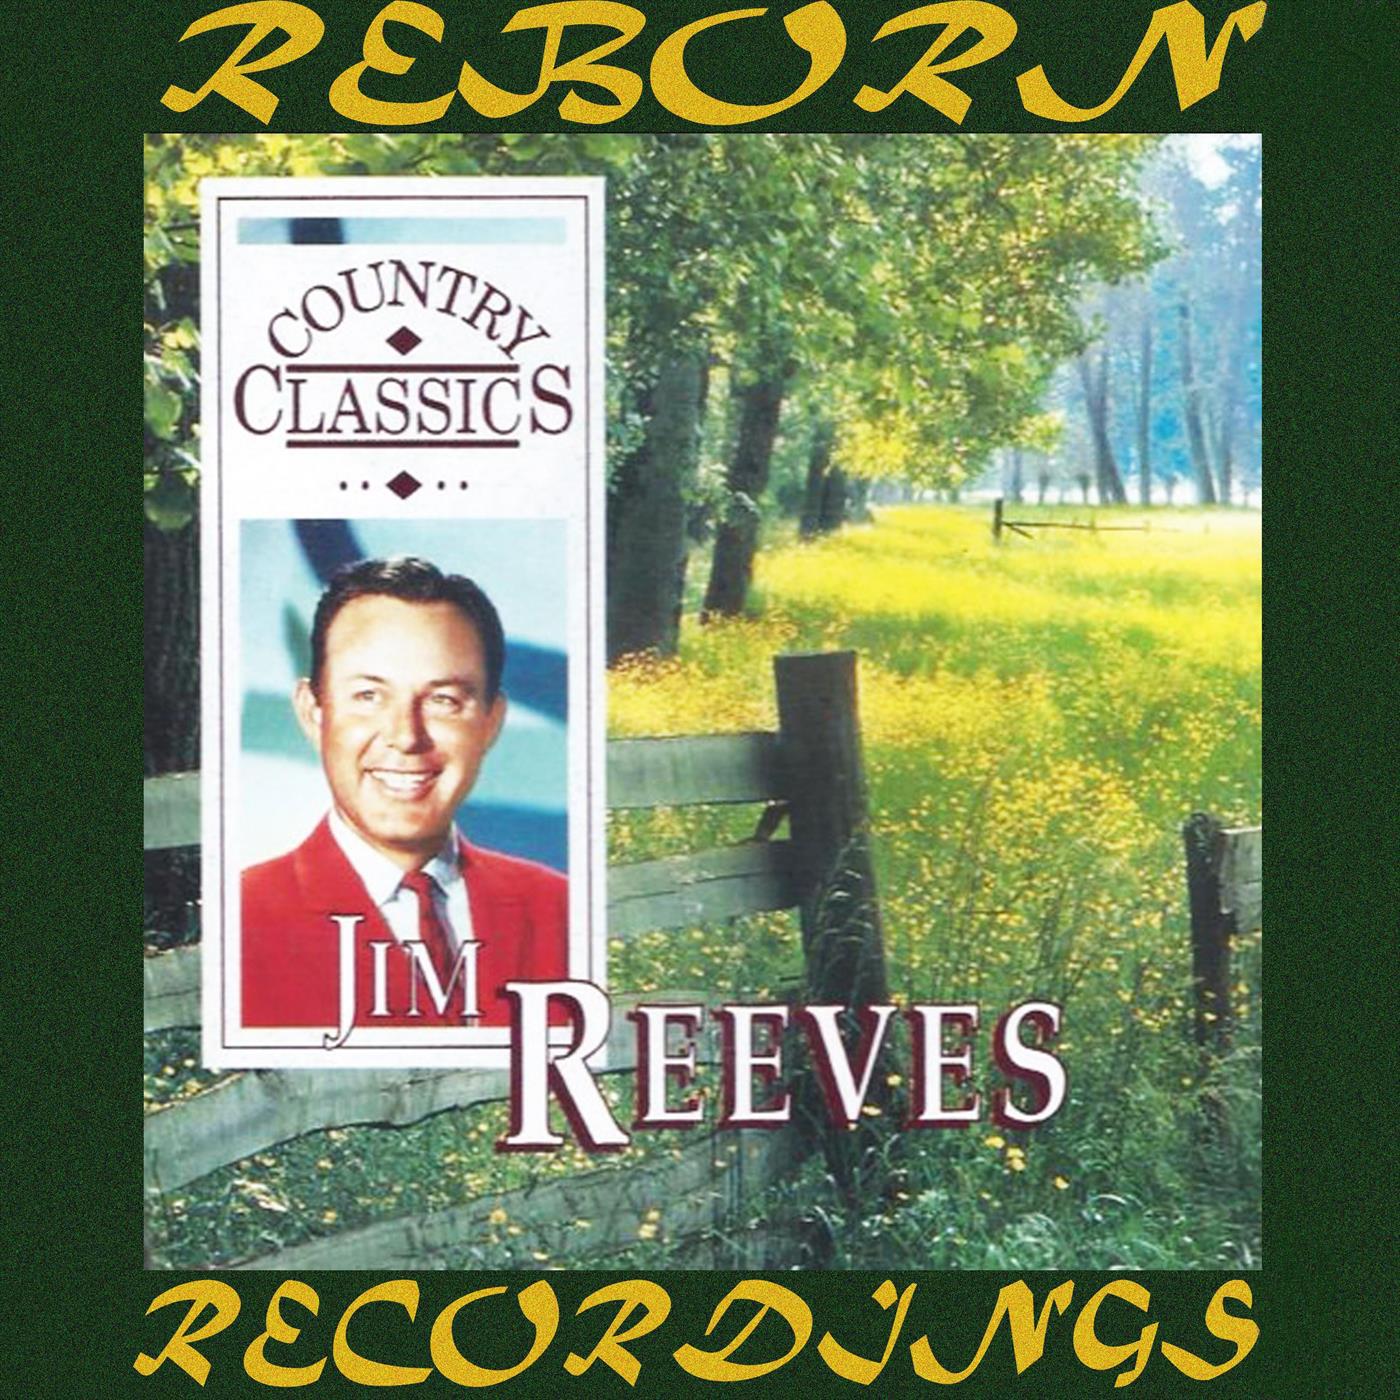 The Complete Country Classics Recordings (Hd Remastered)